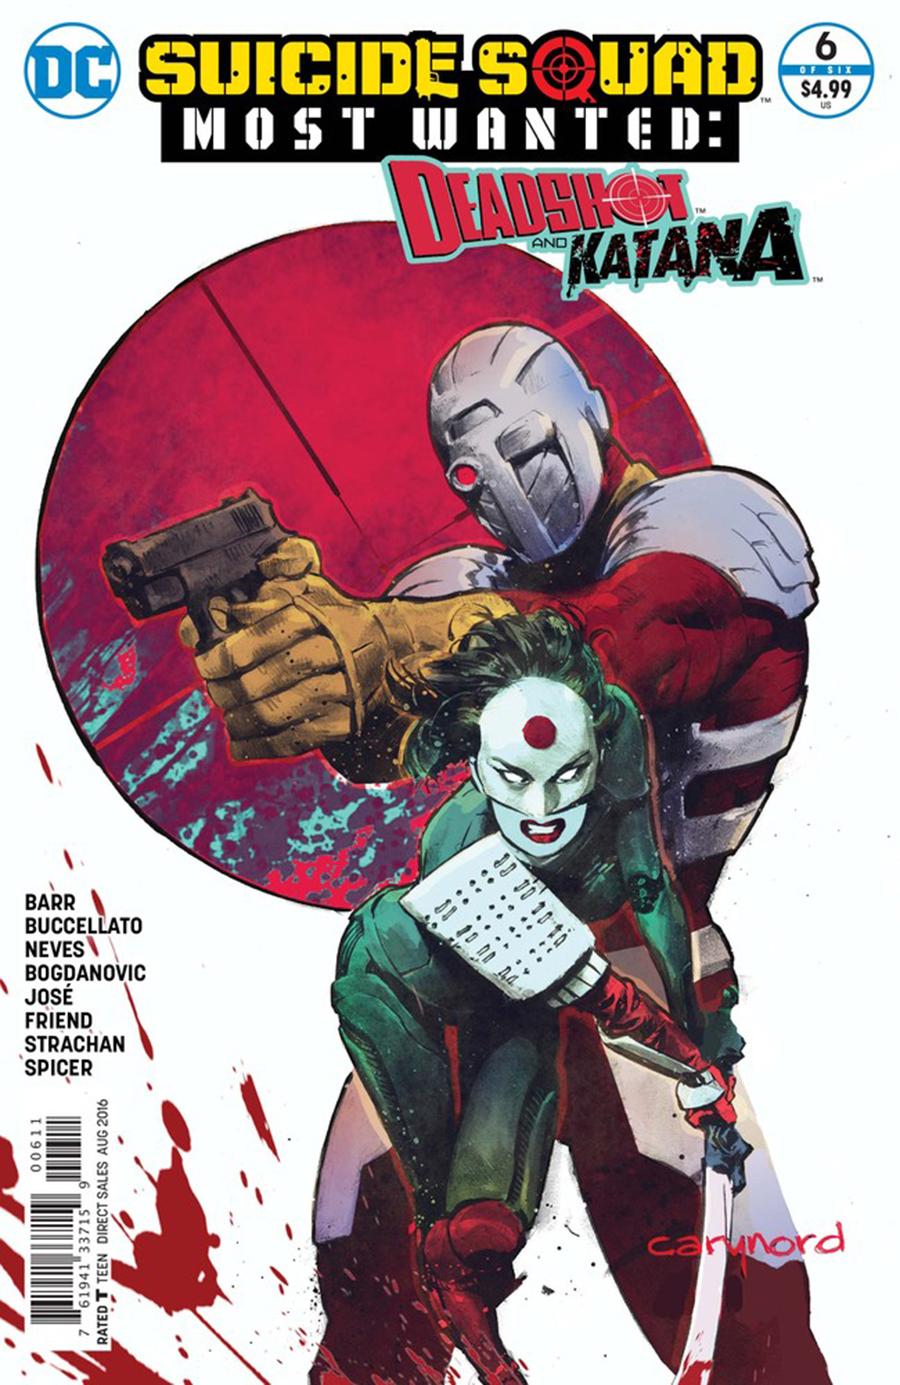 Suicide Squad Most Wanted: Deadshot and Katana Vol. 1 #6